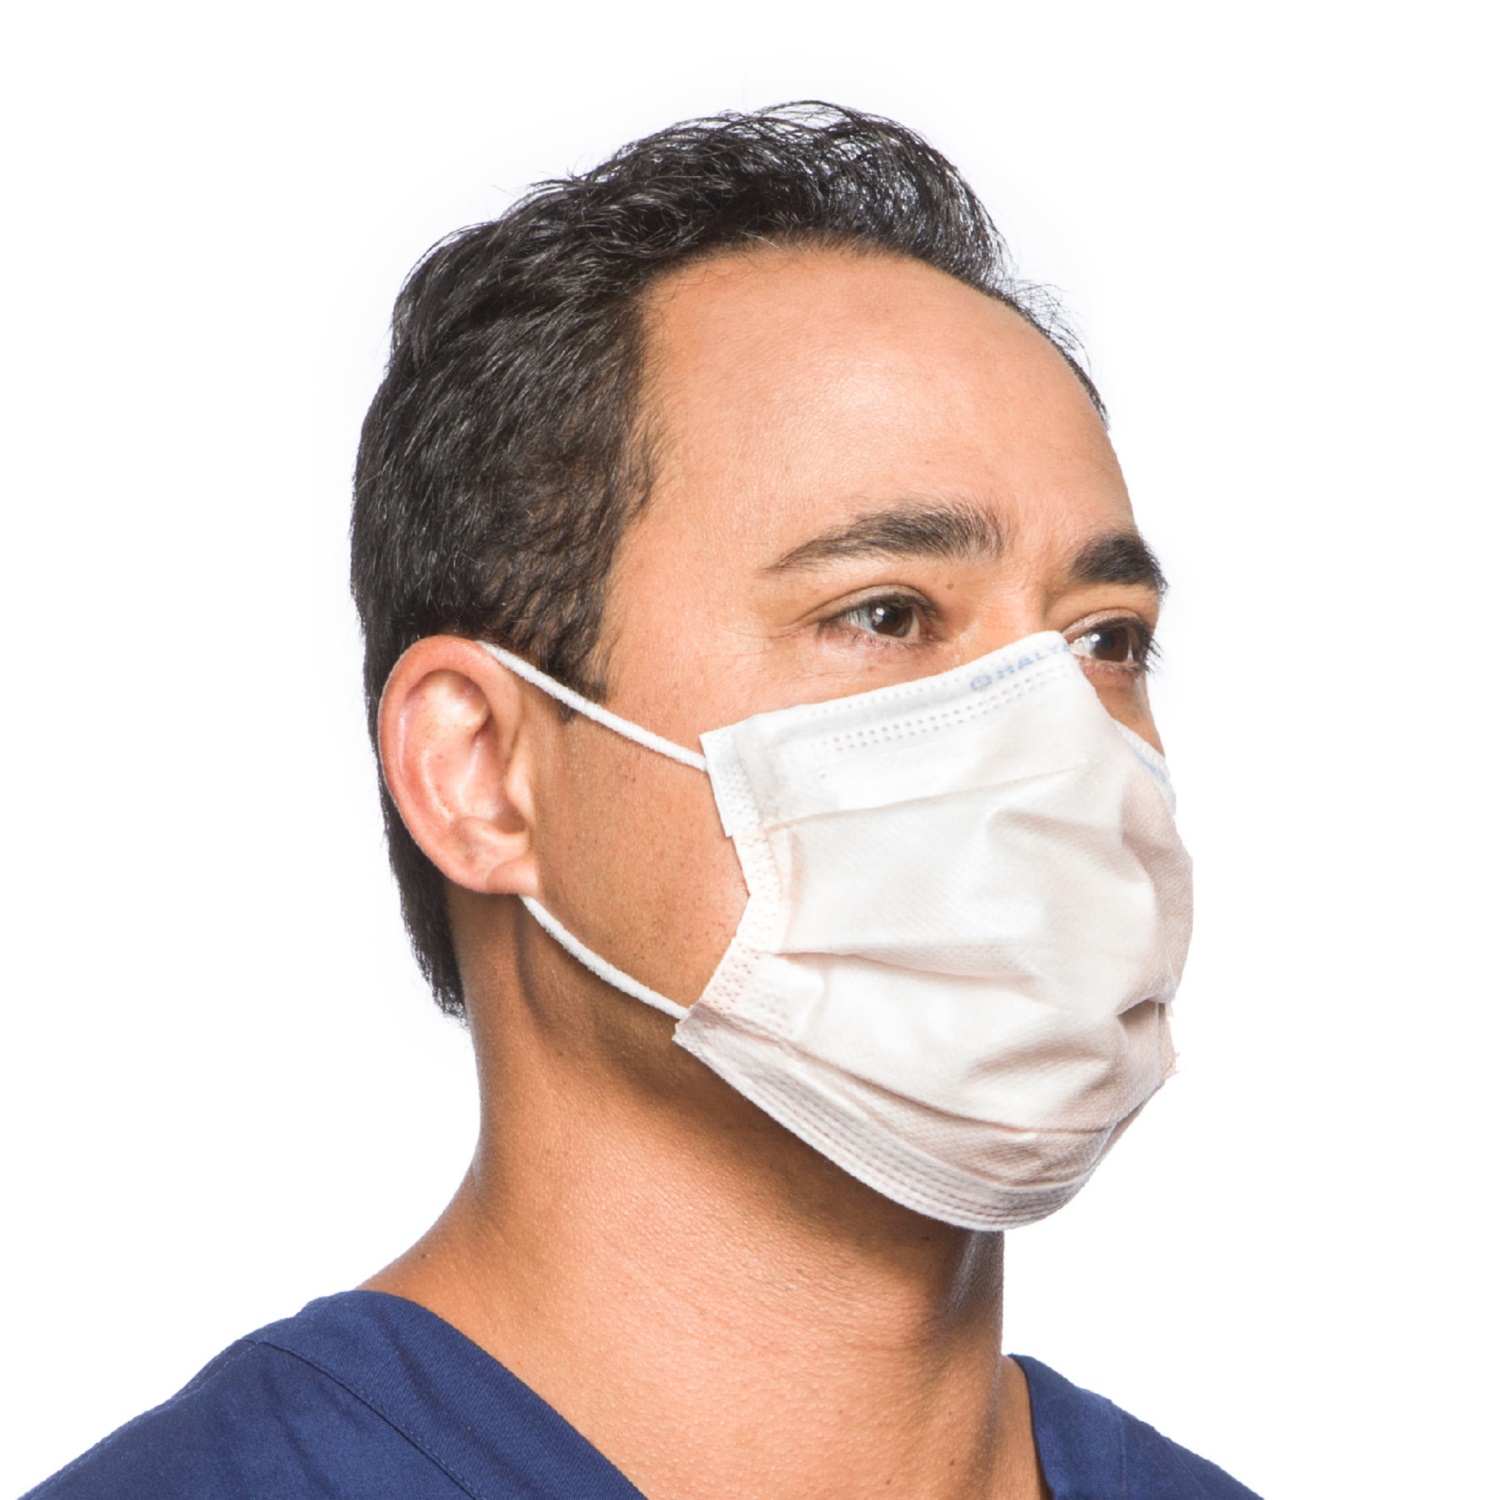 Halyard Fluidshield Level 3 Fog-Free Surgical Face Mask With Earloop